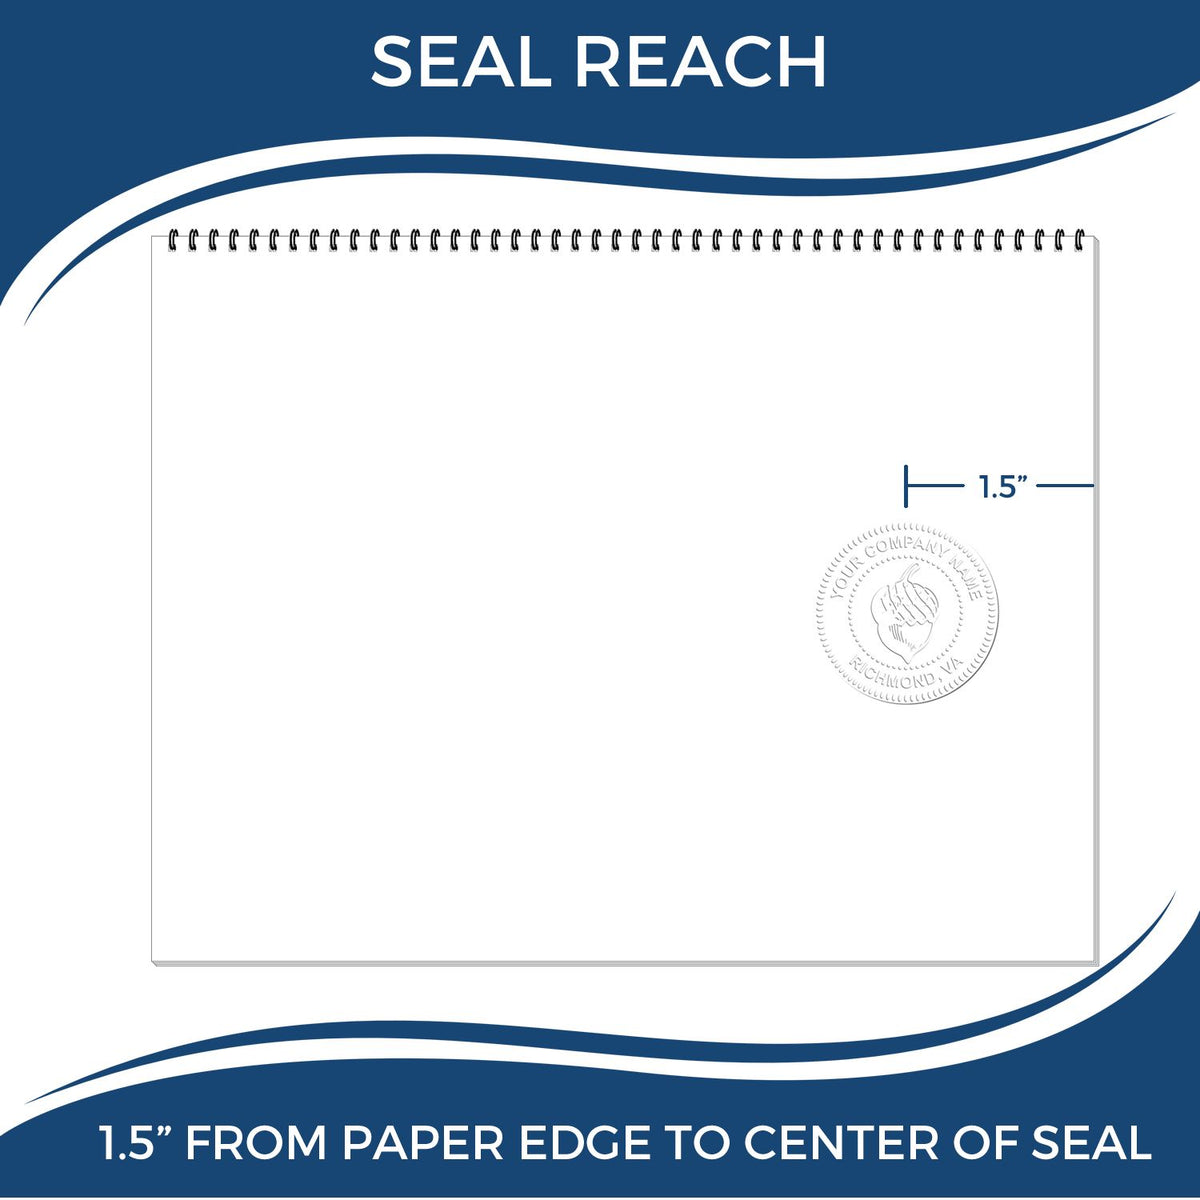 An infographic showing the seal reach which is represented by a ruler and a miniature seal image of the Florida Desk Surveyor Seal Embosser